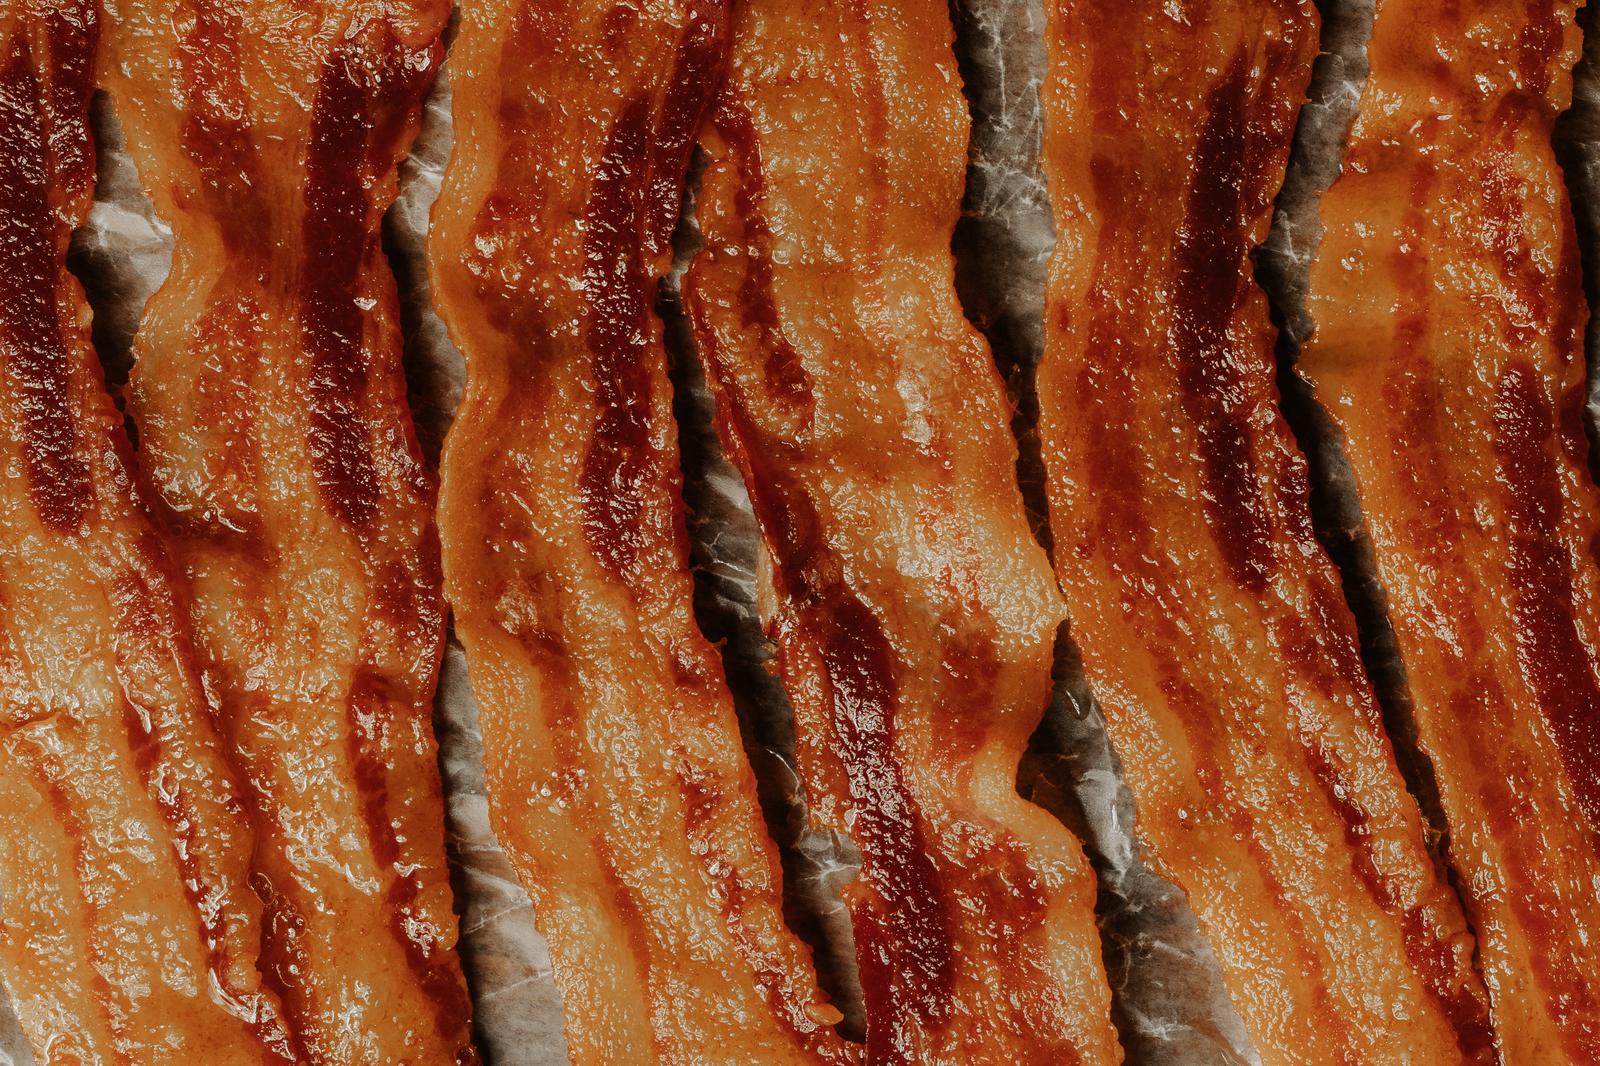 These Are the 32 Worst Foods in the Human Diet, According to AI – How Many Have You Eaten Recently? Bacon